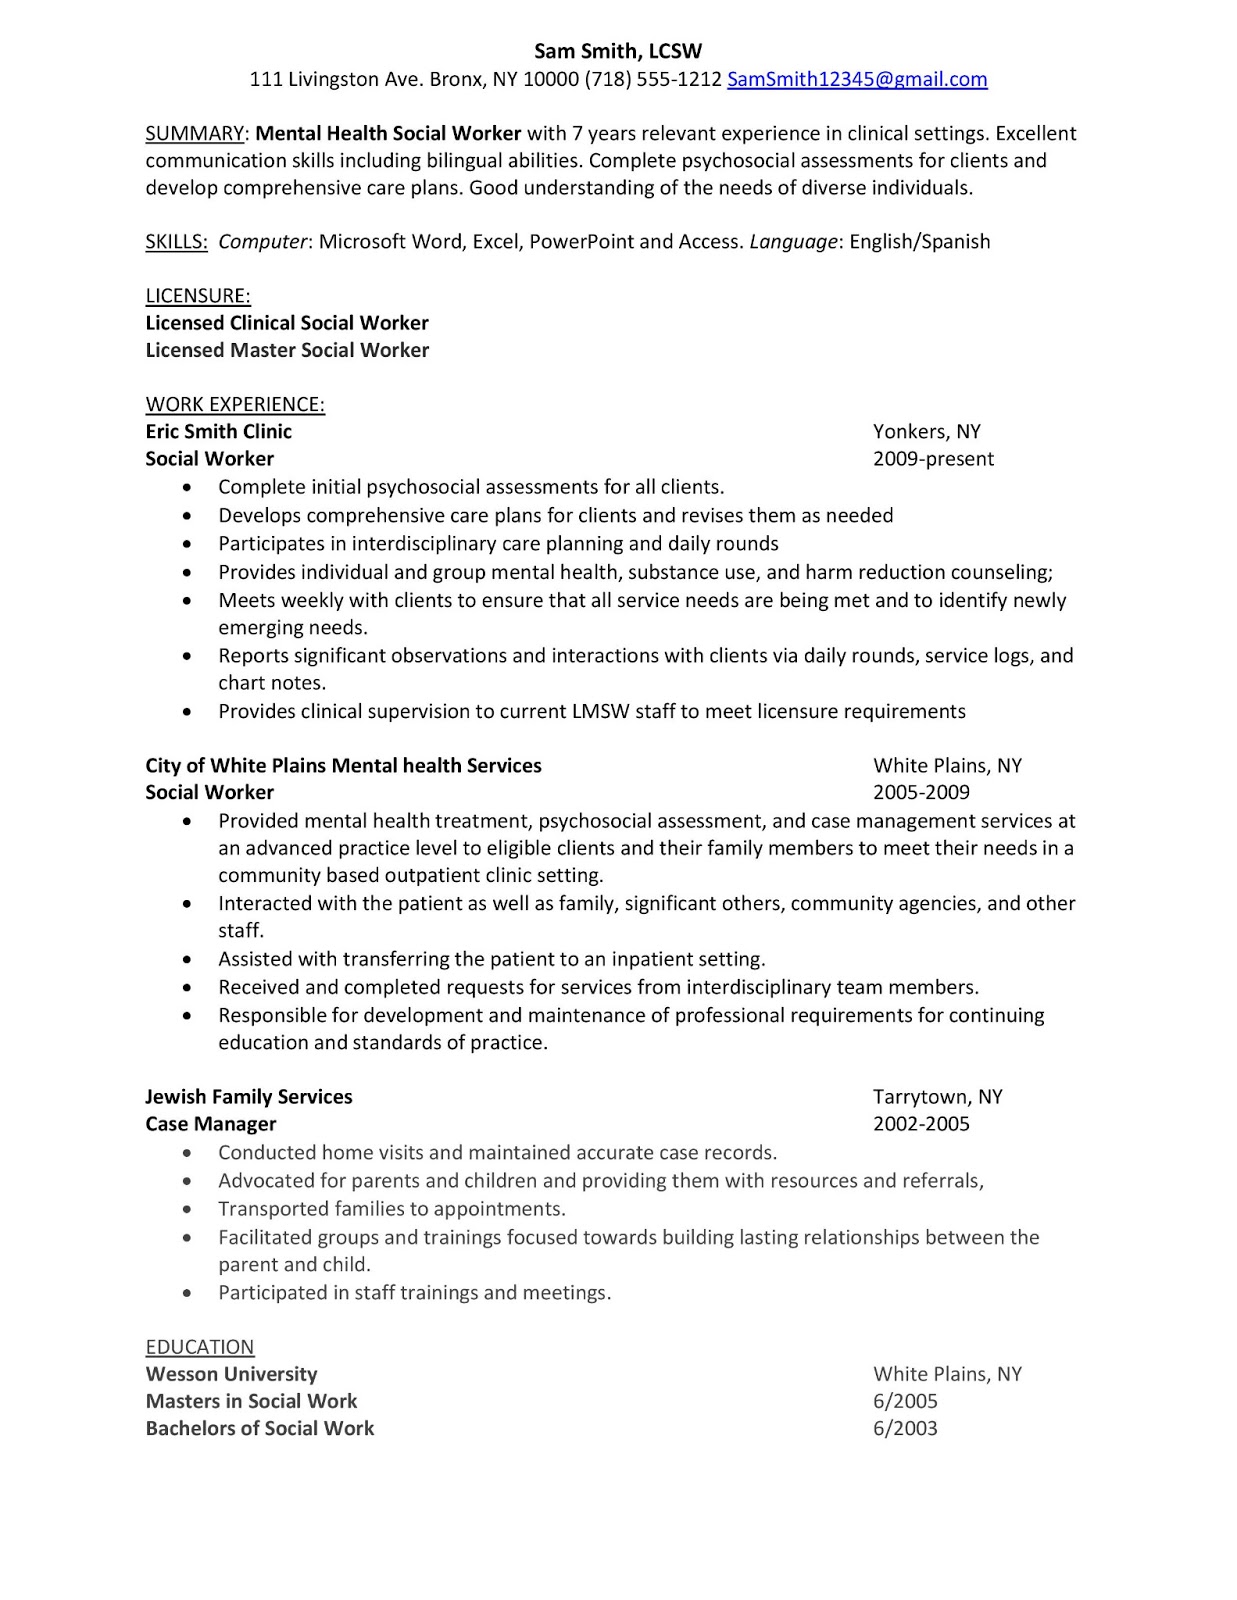 Example of personal statement for graduate school in social work